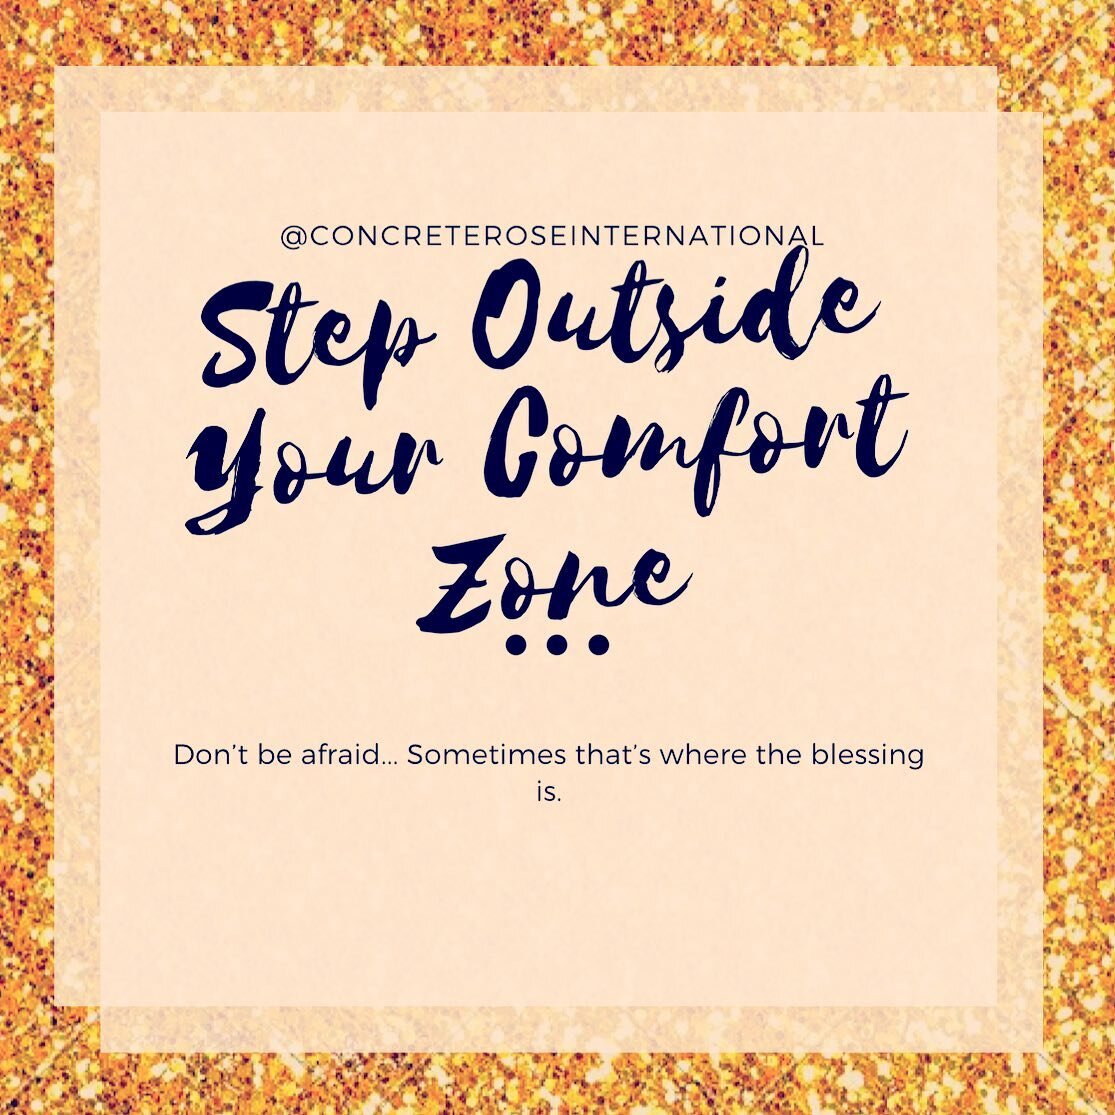 Don&rsquo;t be afraid to step outside of your comfort zone, if there&rsquo;s something you really want to change or an experience you want to have. What&rsquo;s familiar doesn&rsquo;t always equate to peace or happiness. We must sometimes lean into t